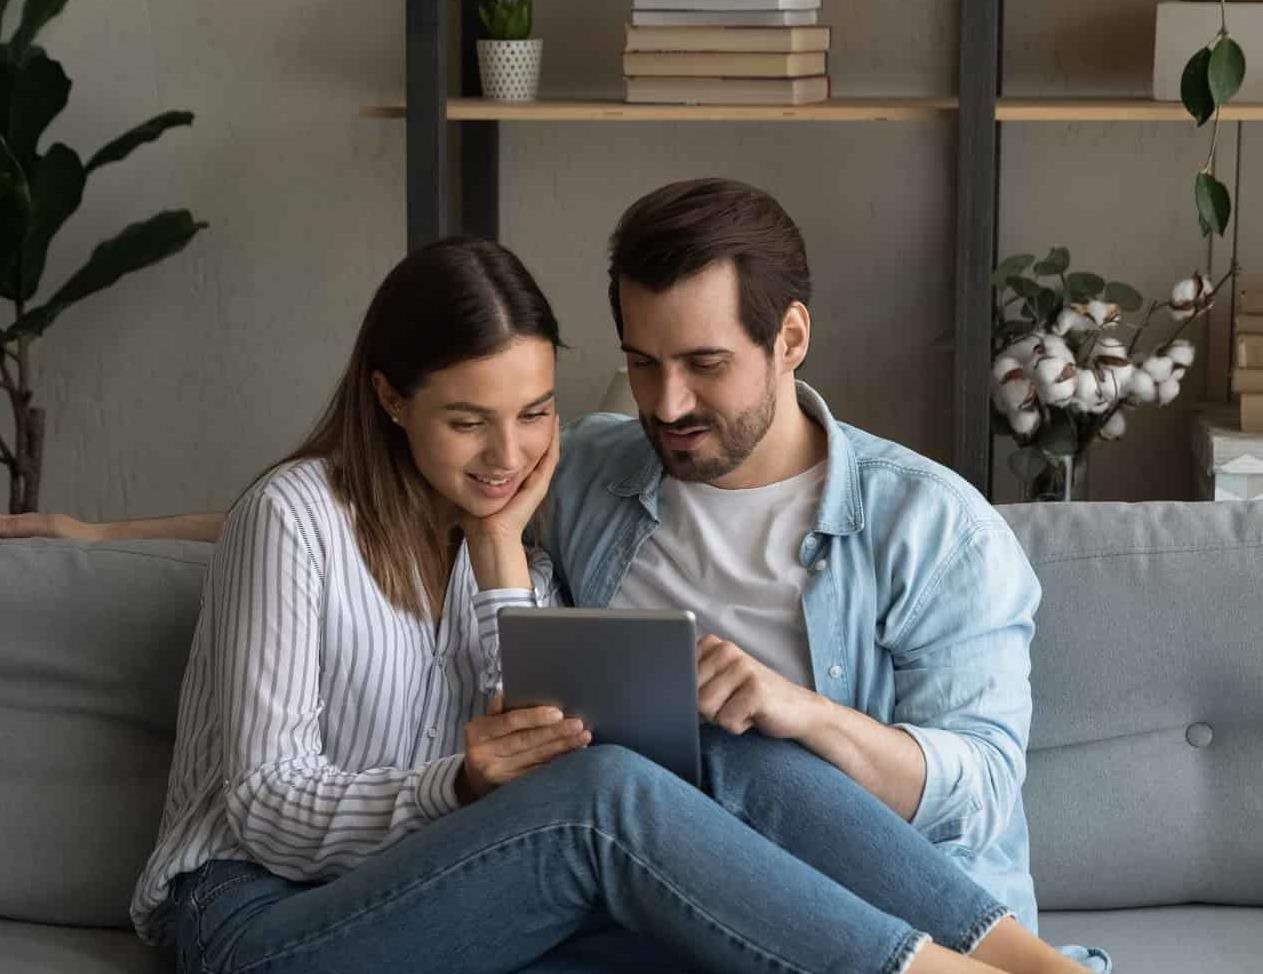 Couple sitting on couch looking at tablet device